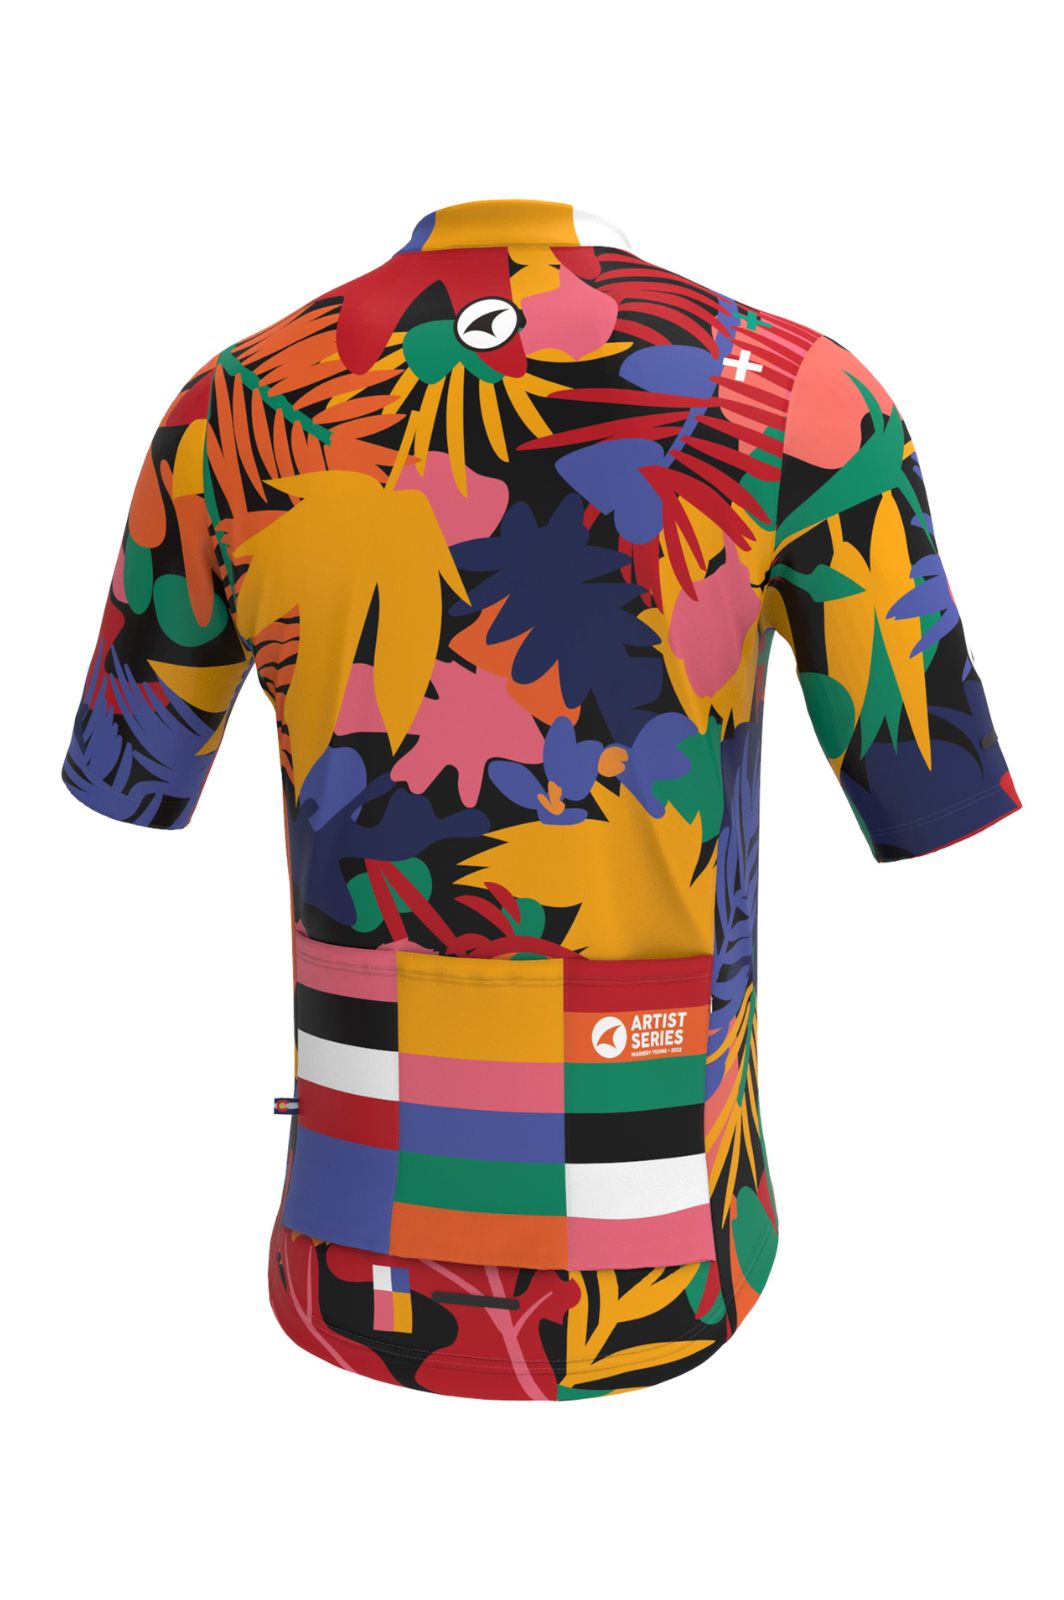 Unique Cycling Jerseys - Men's Colorado Botanical by Mariery Young